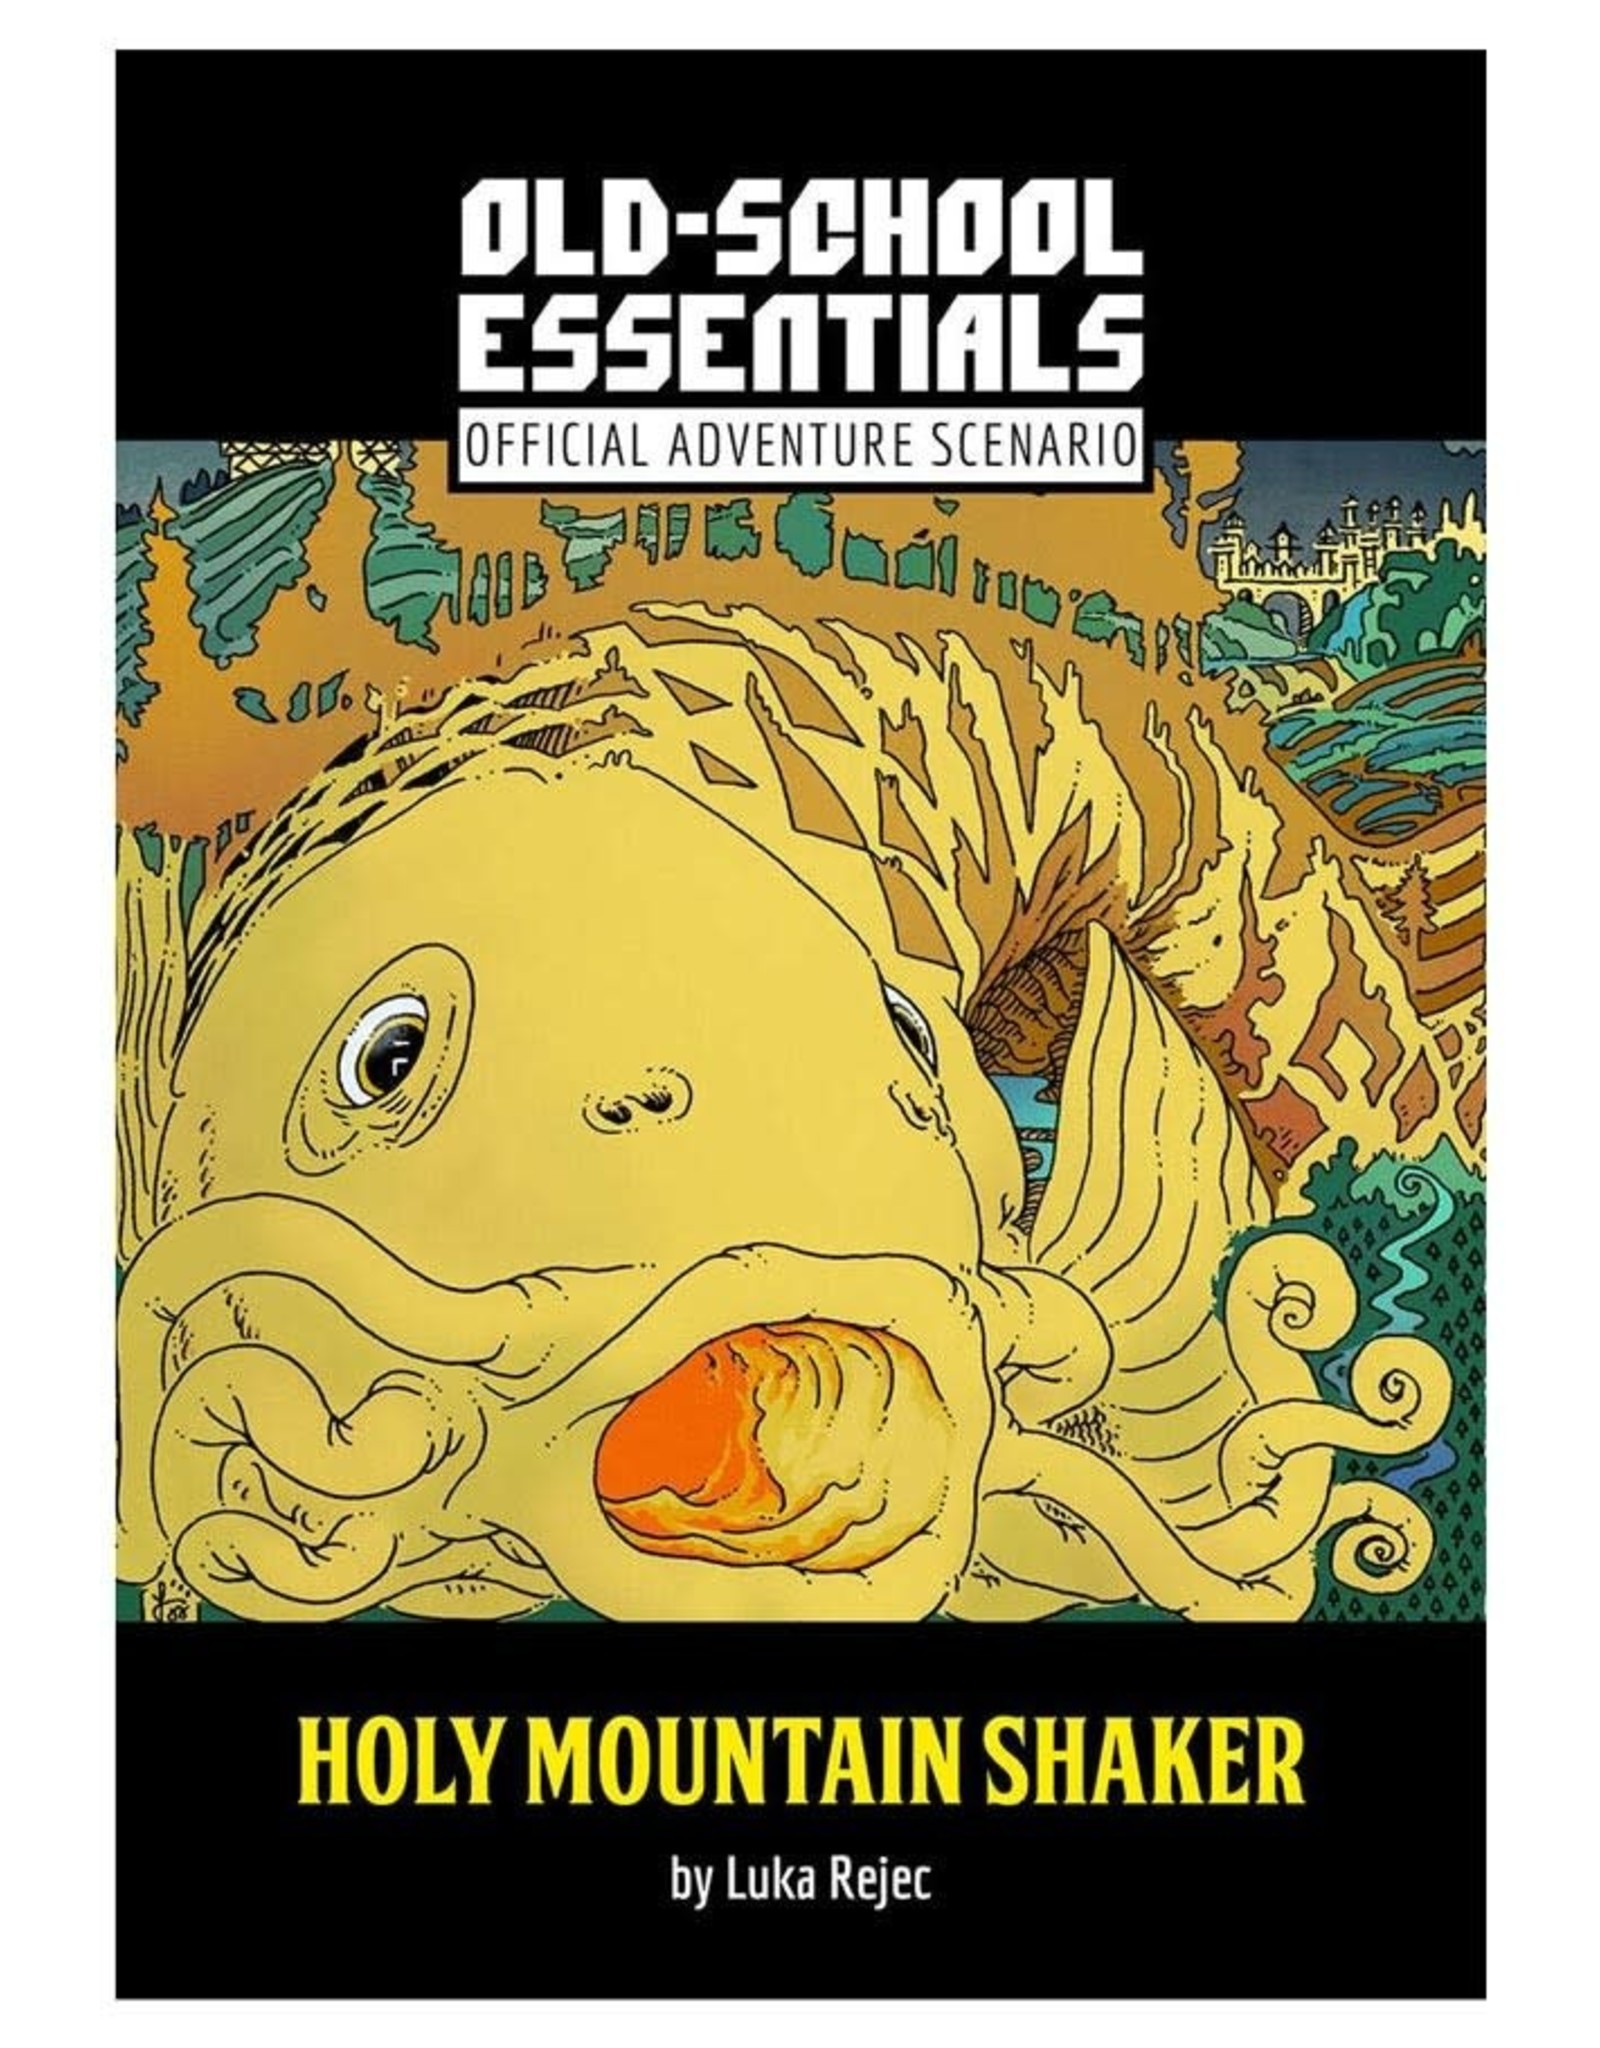 Exalted Funeral Press Old-School Essentials: Holy Mountain Shaker